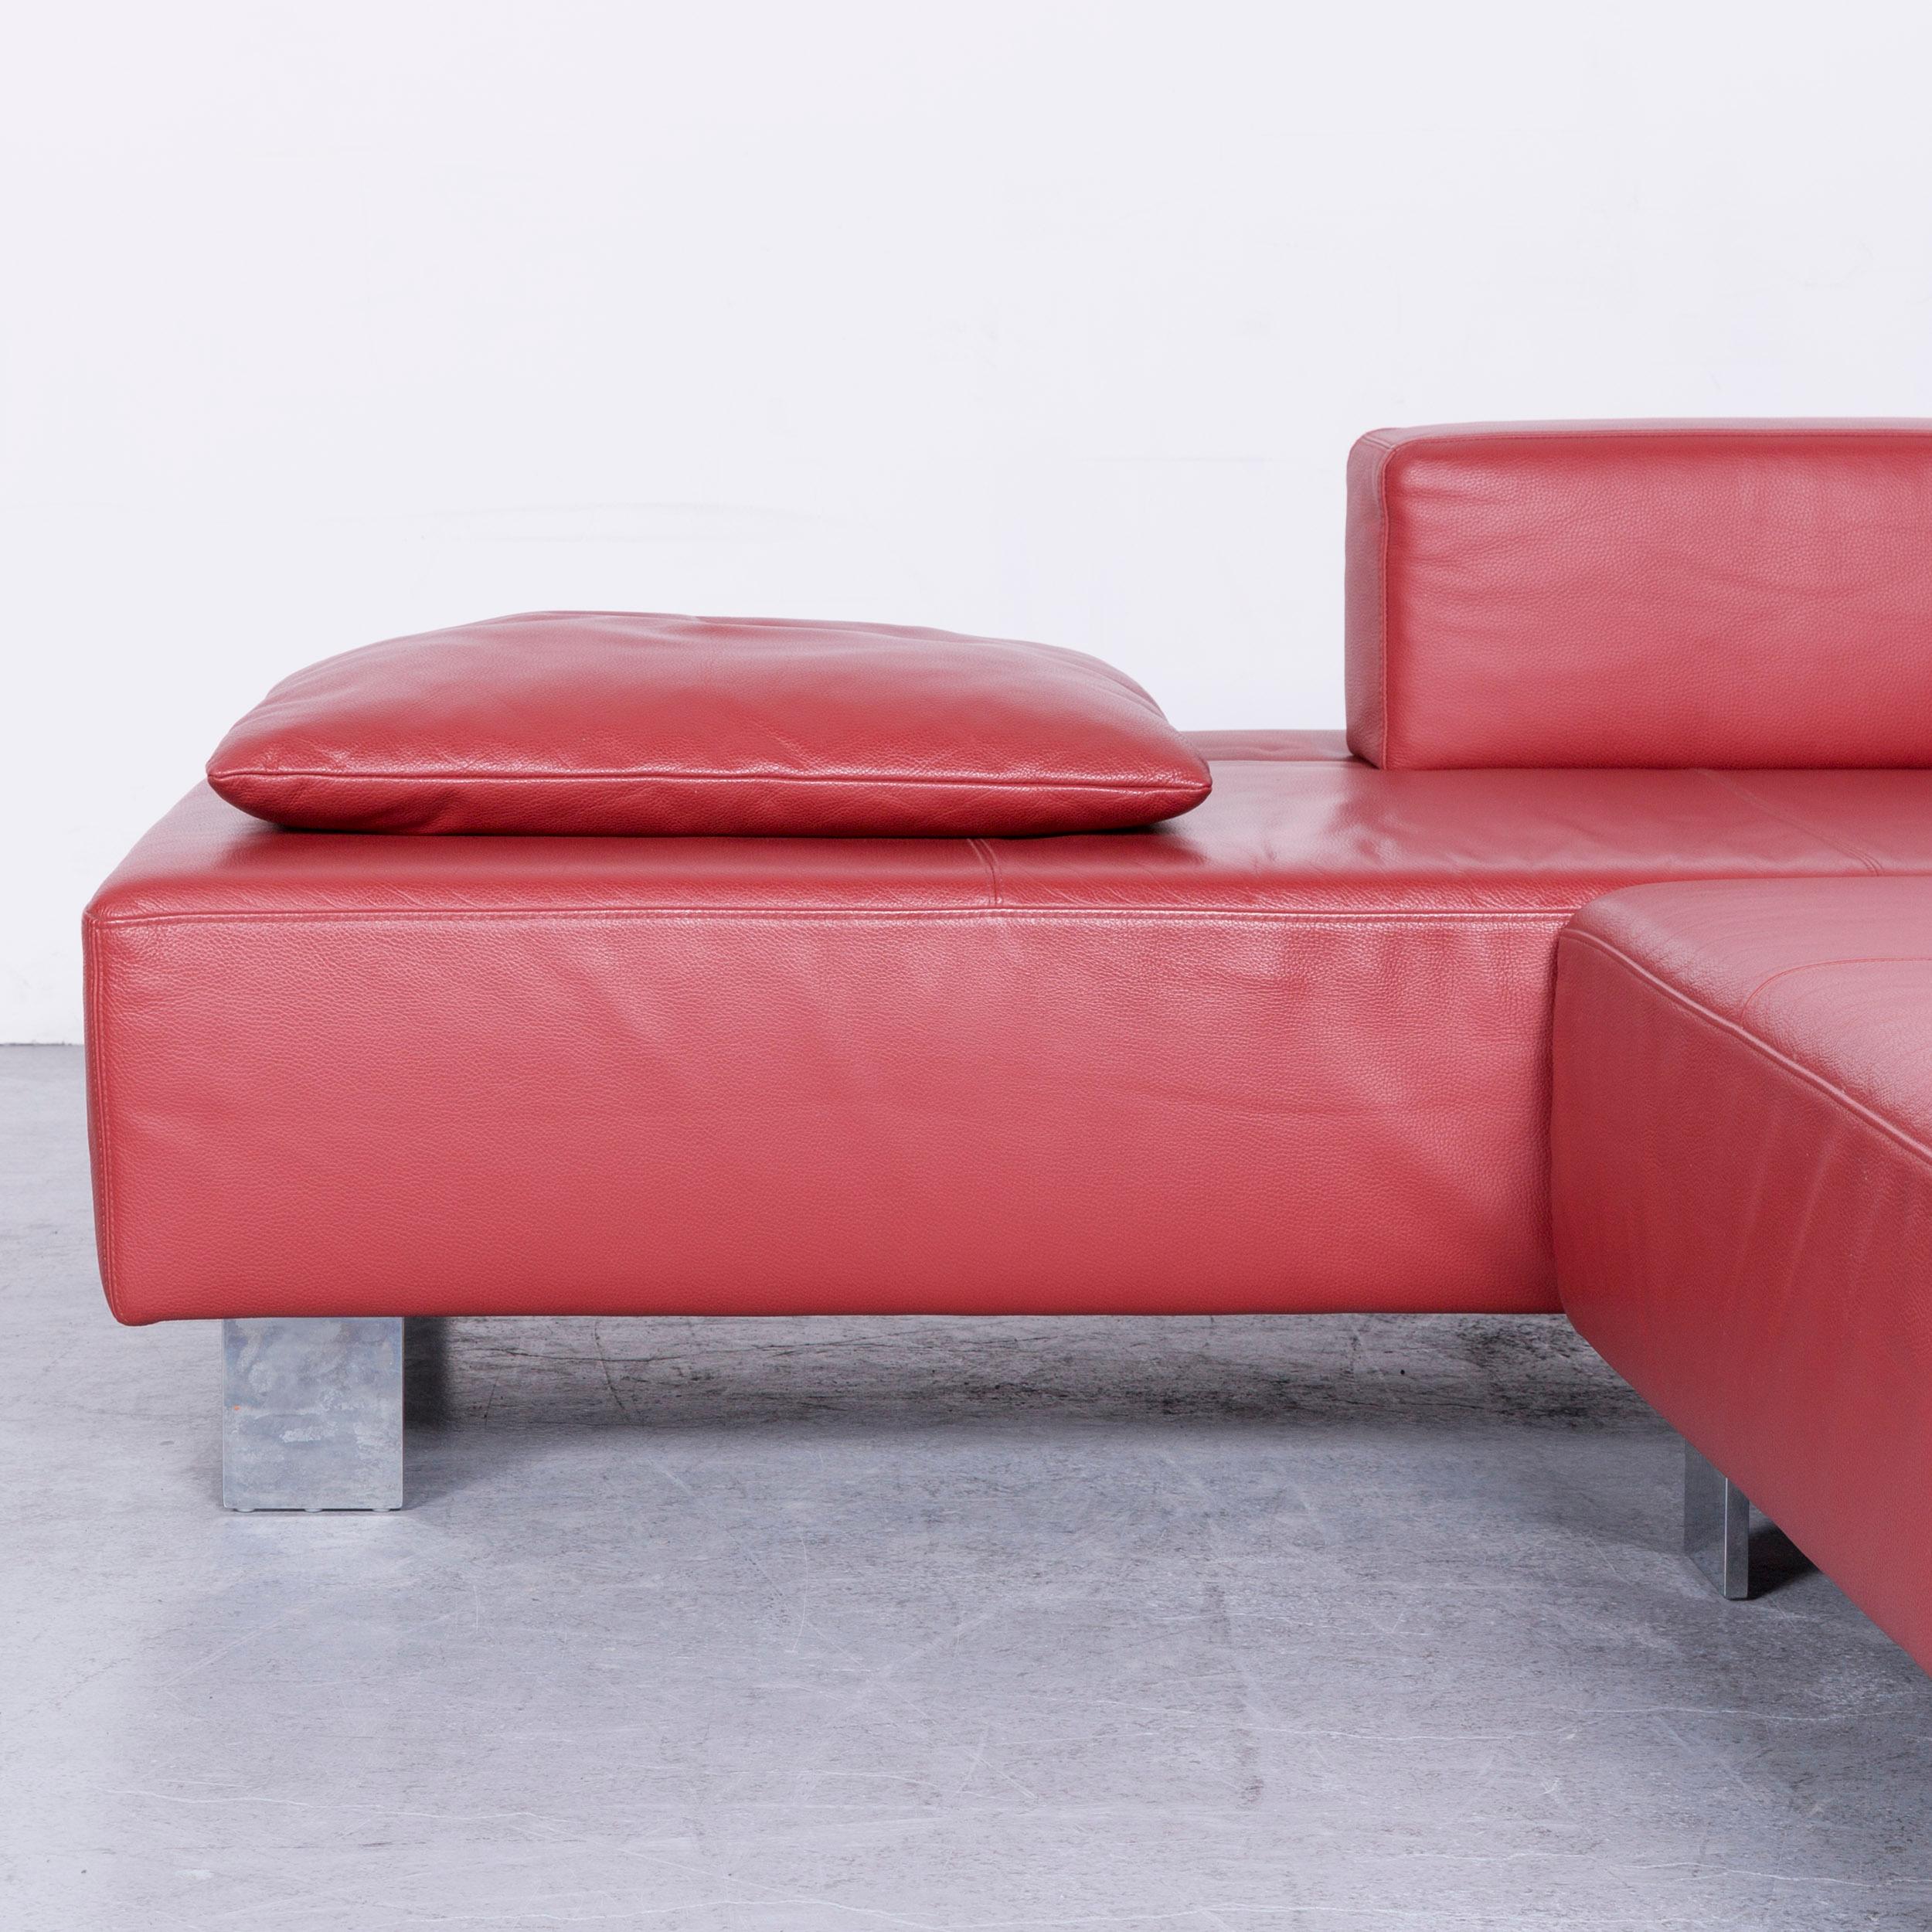 Brühl & Sippold Fields Designer Sofa Red Leather Corner Sofa with Function In Good Condition For Sale In Cologne, DE